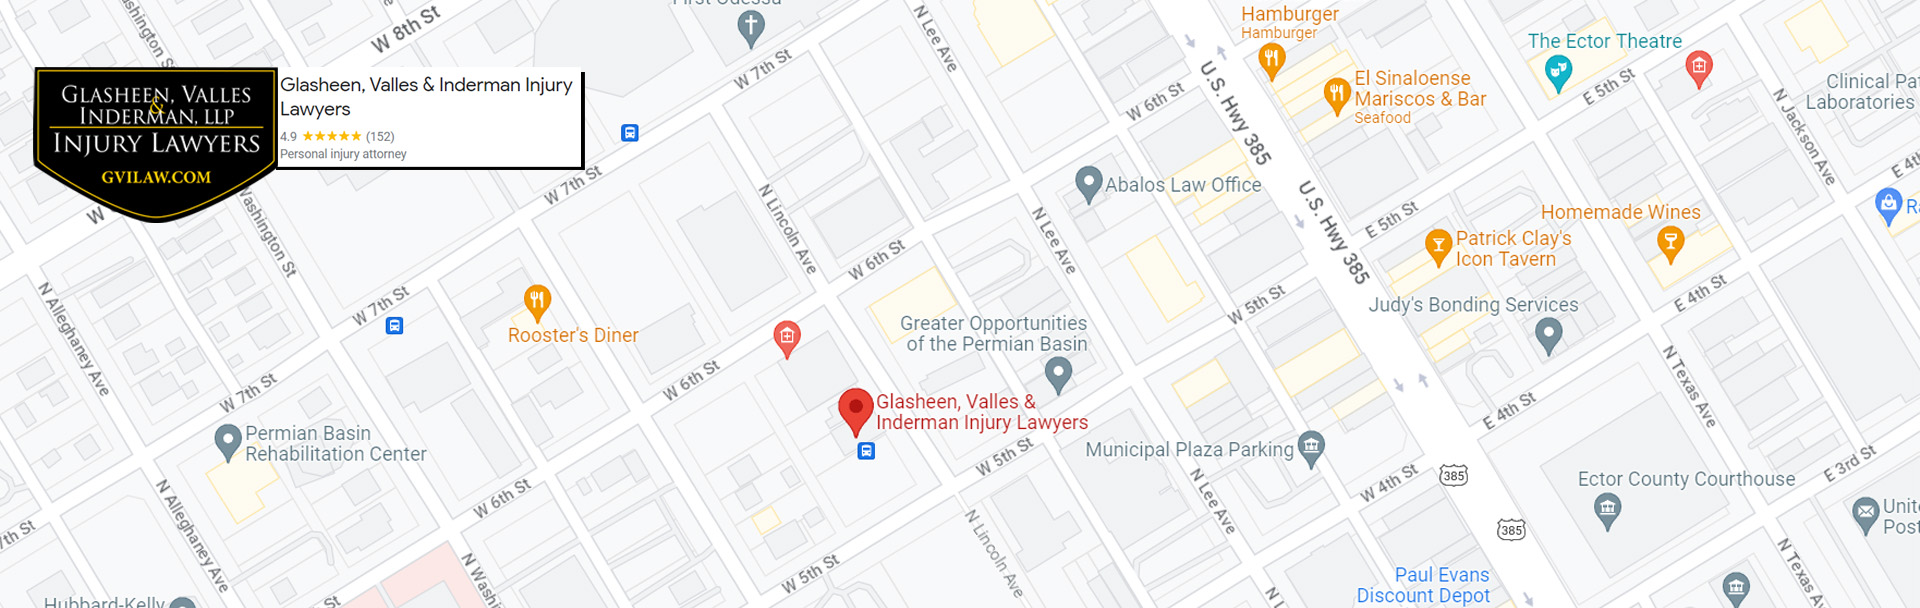 Glasheen Valles and Inderman Injury Lawyers Odessa office location on Maps